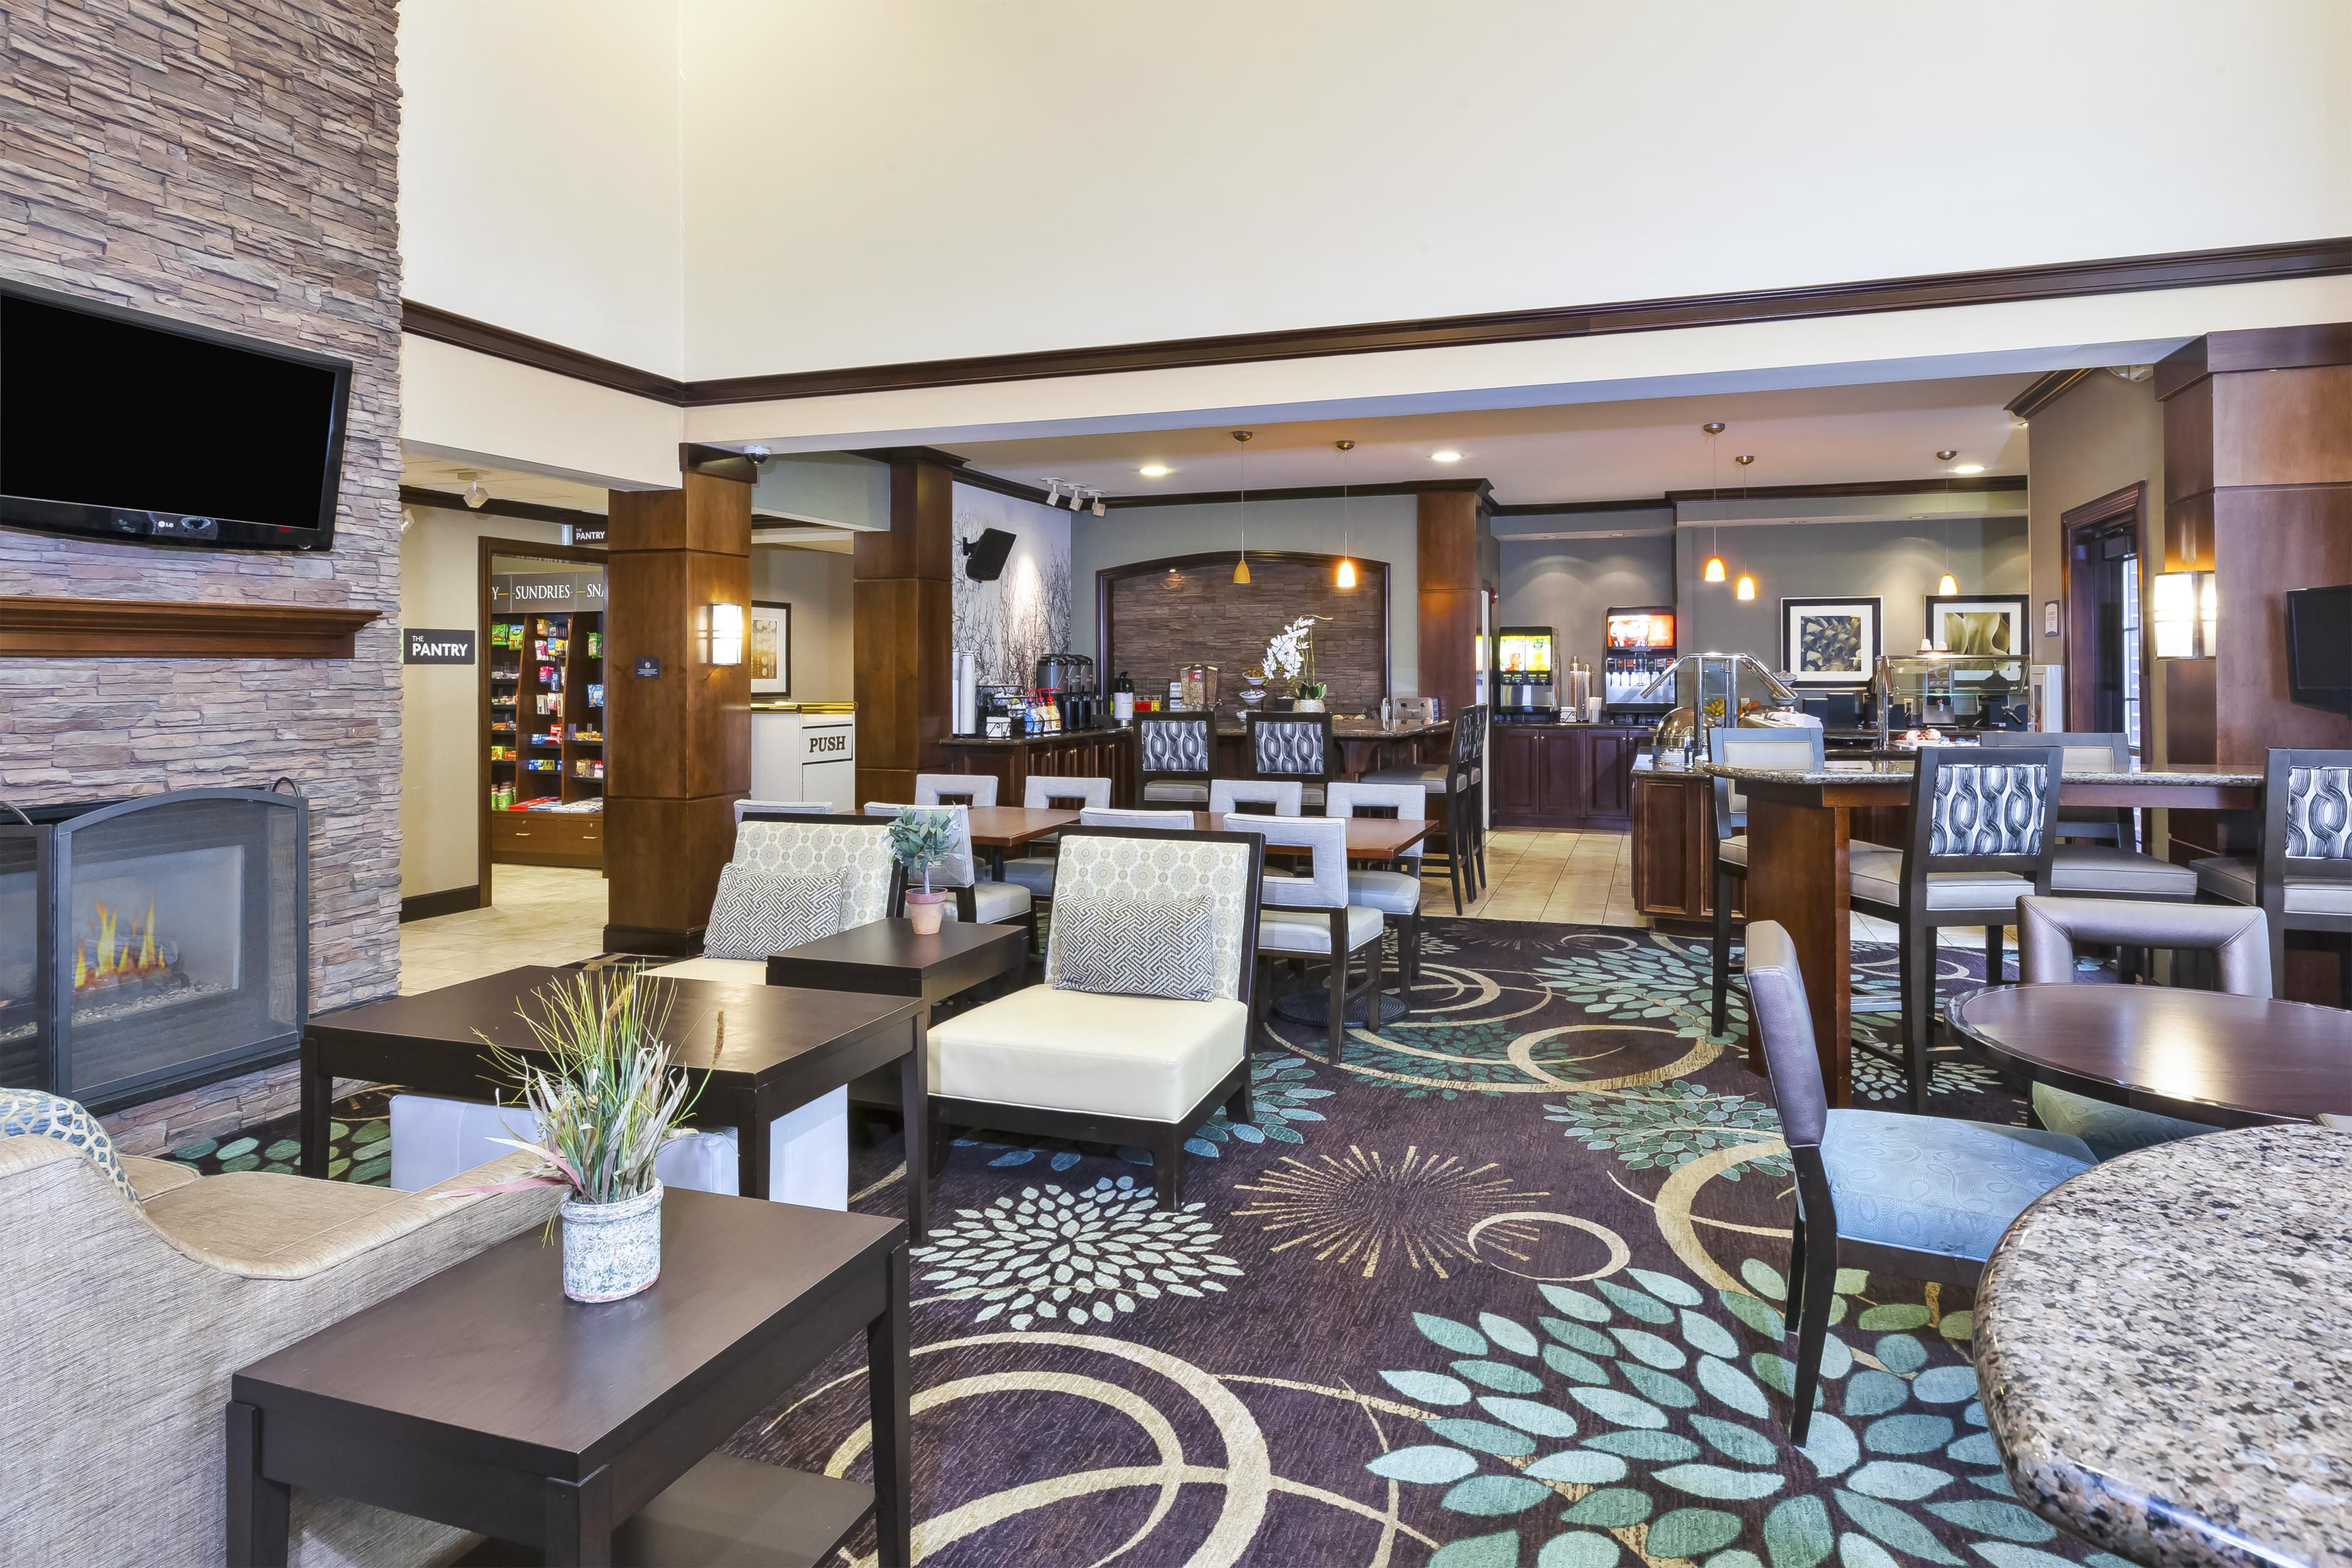 Your stay includes dinner socials three nights per week, which offers light appetizers. 